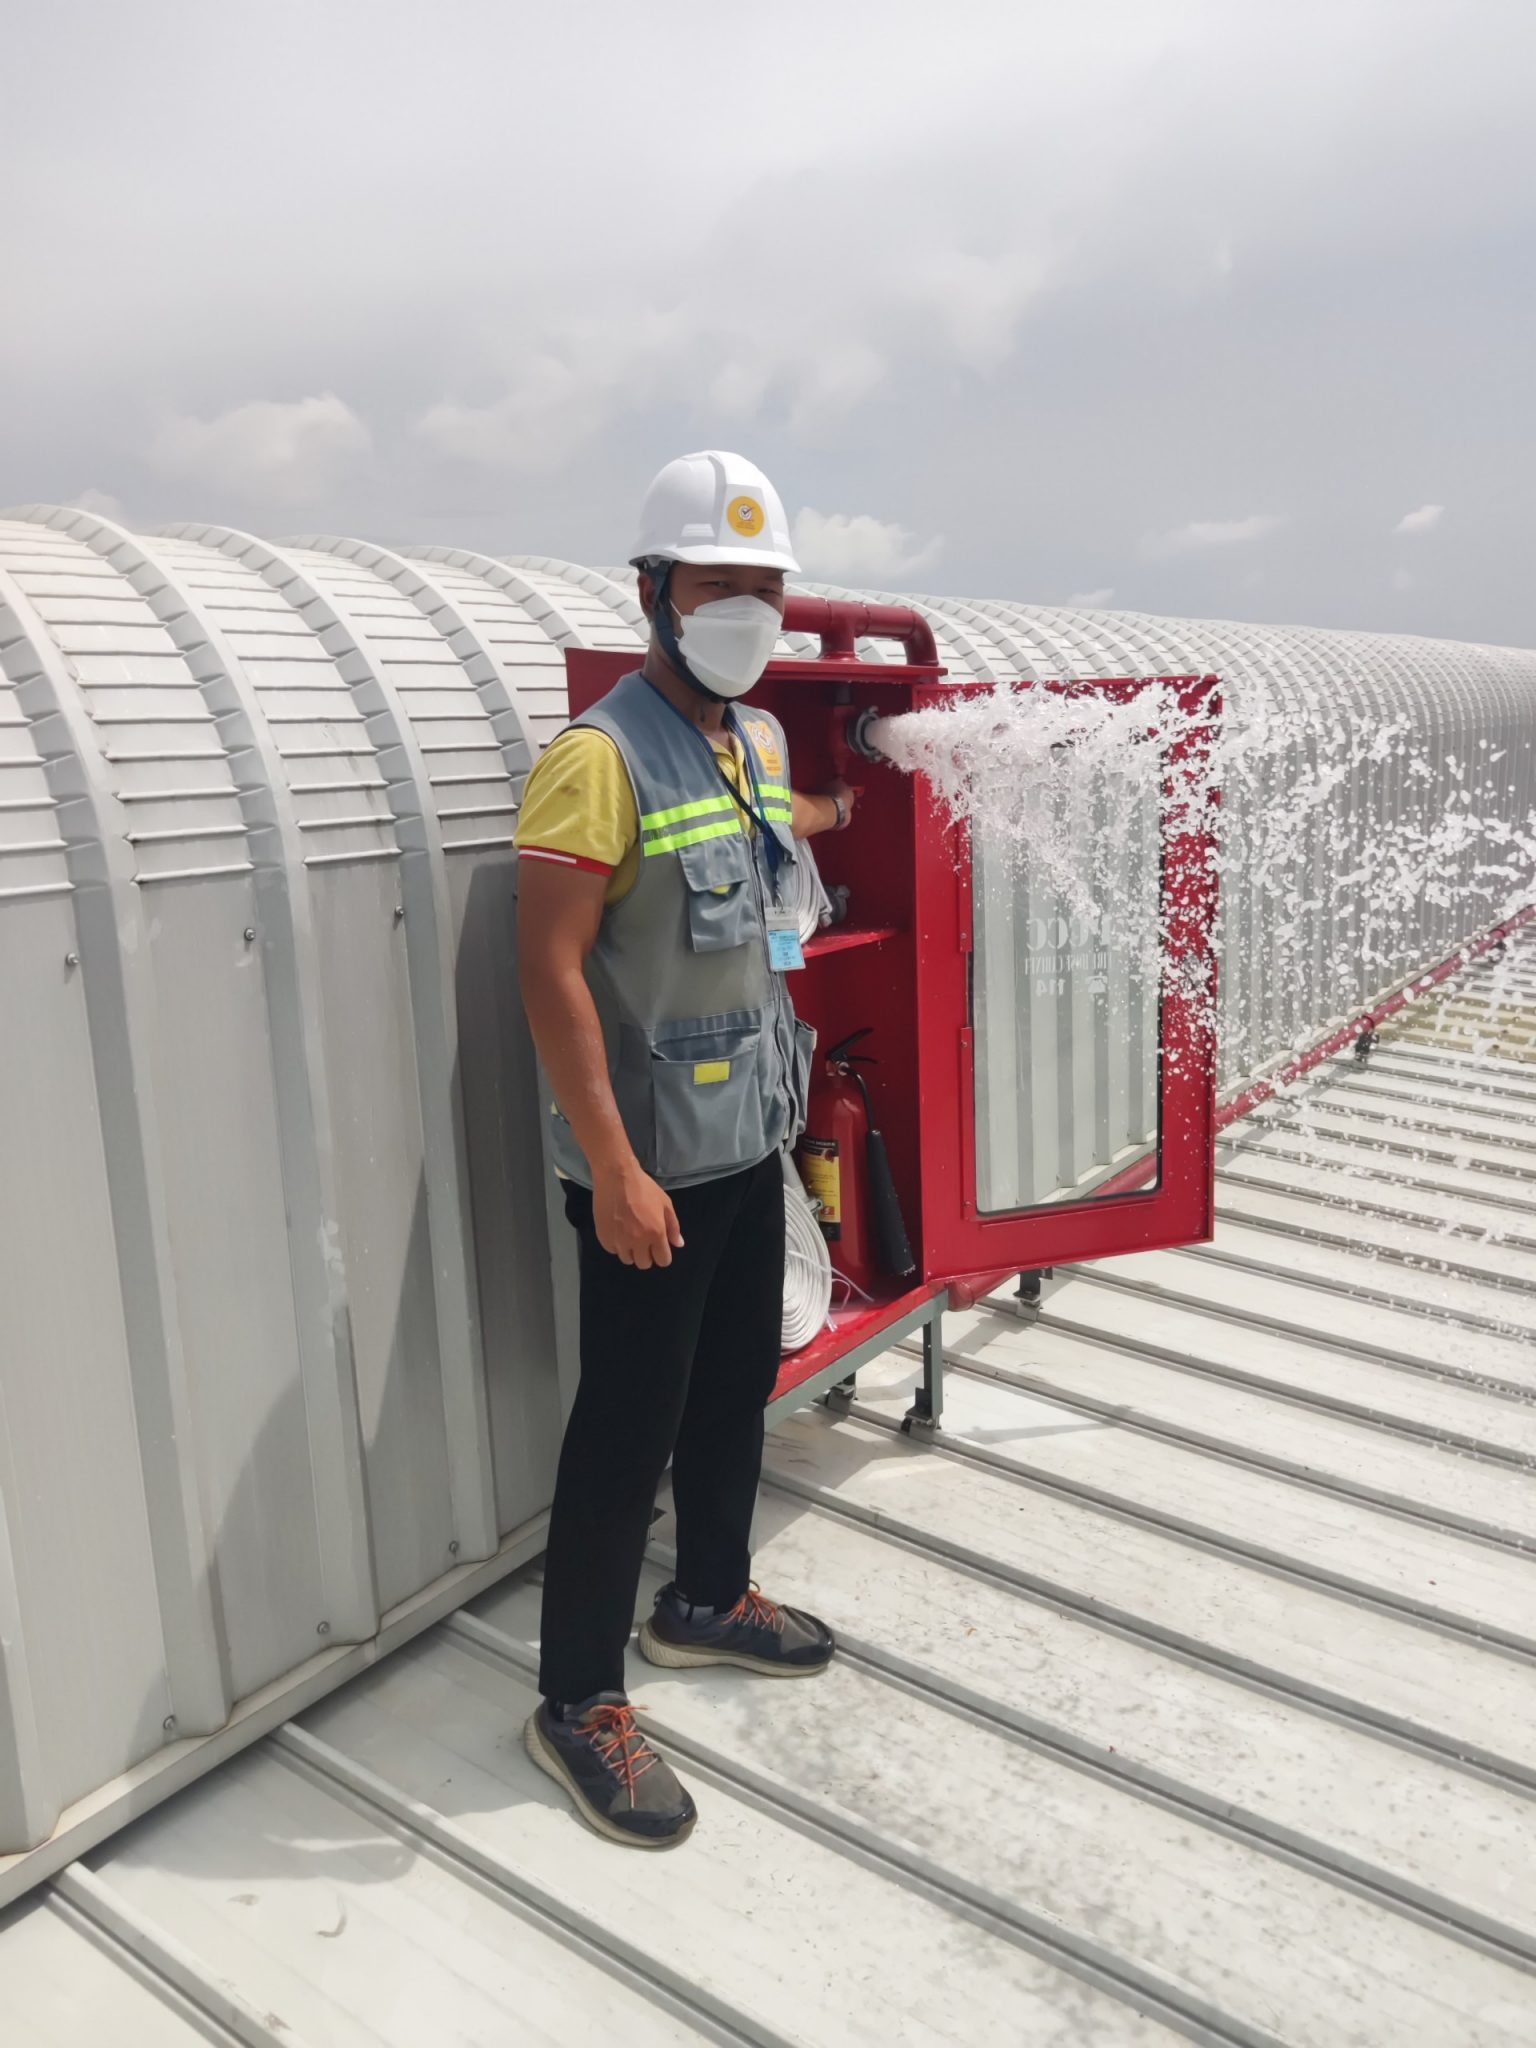 ĐÔNG NAM has tested the installed fire protection system